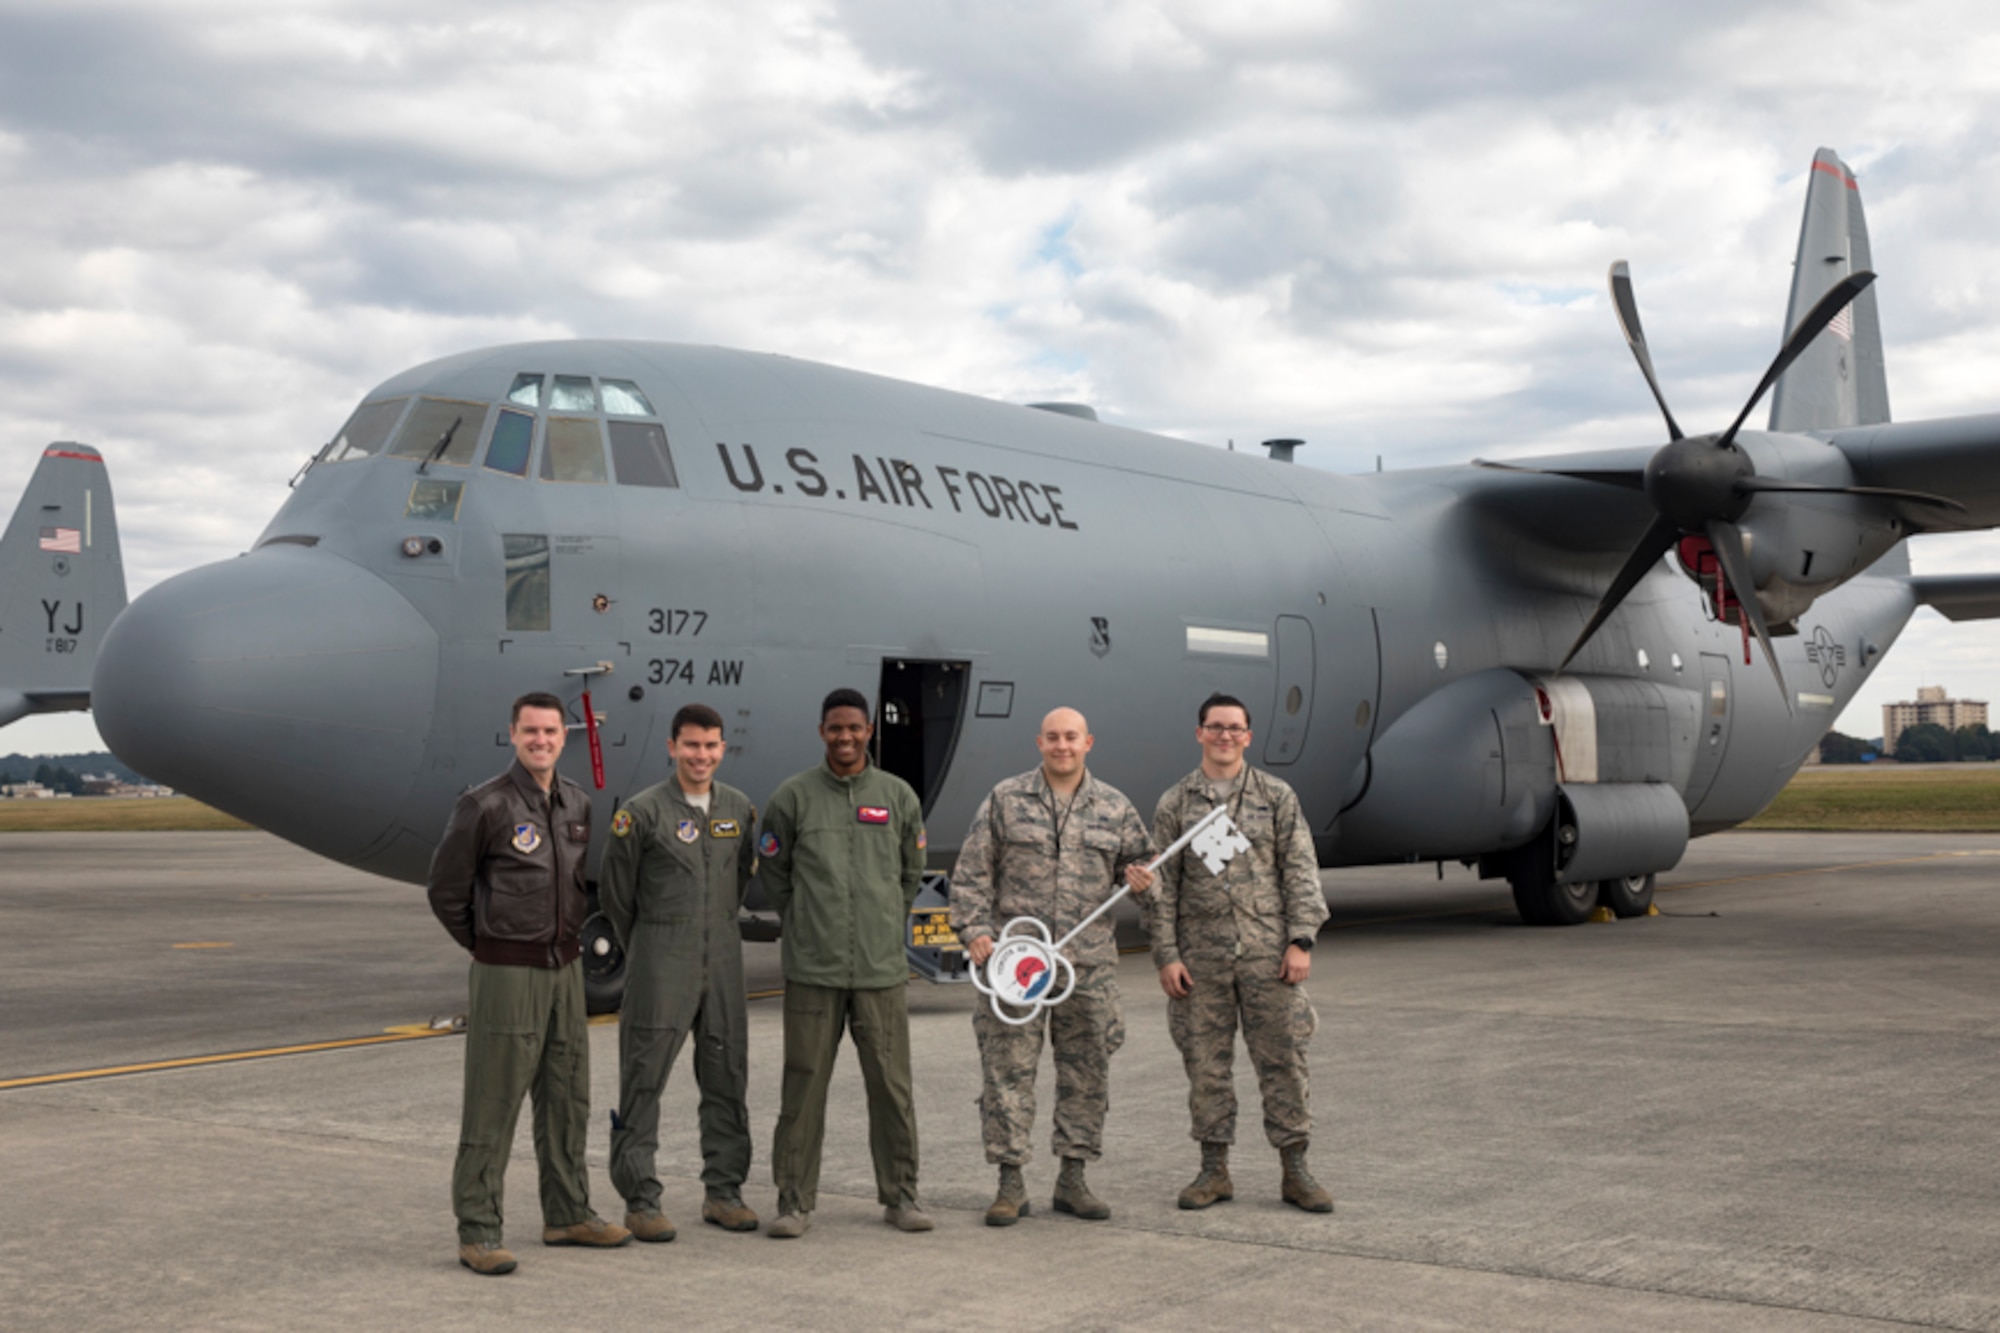 Members of the C-130J delivery team pose for a photo in front of a C-130J Super Hercules at Yokota Air Base, Japan, Oct. 31, 2107. This is the sixth C-130J delivered to Yokota and the first from Dyess Air Force Base, Texas, as part of fleet-wide redistribution of assets set in motion by Air Mobility Command.